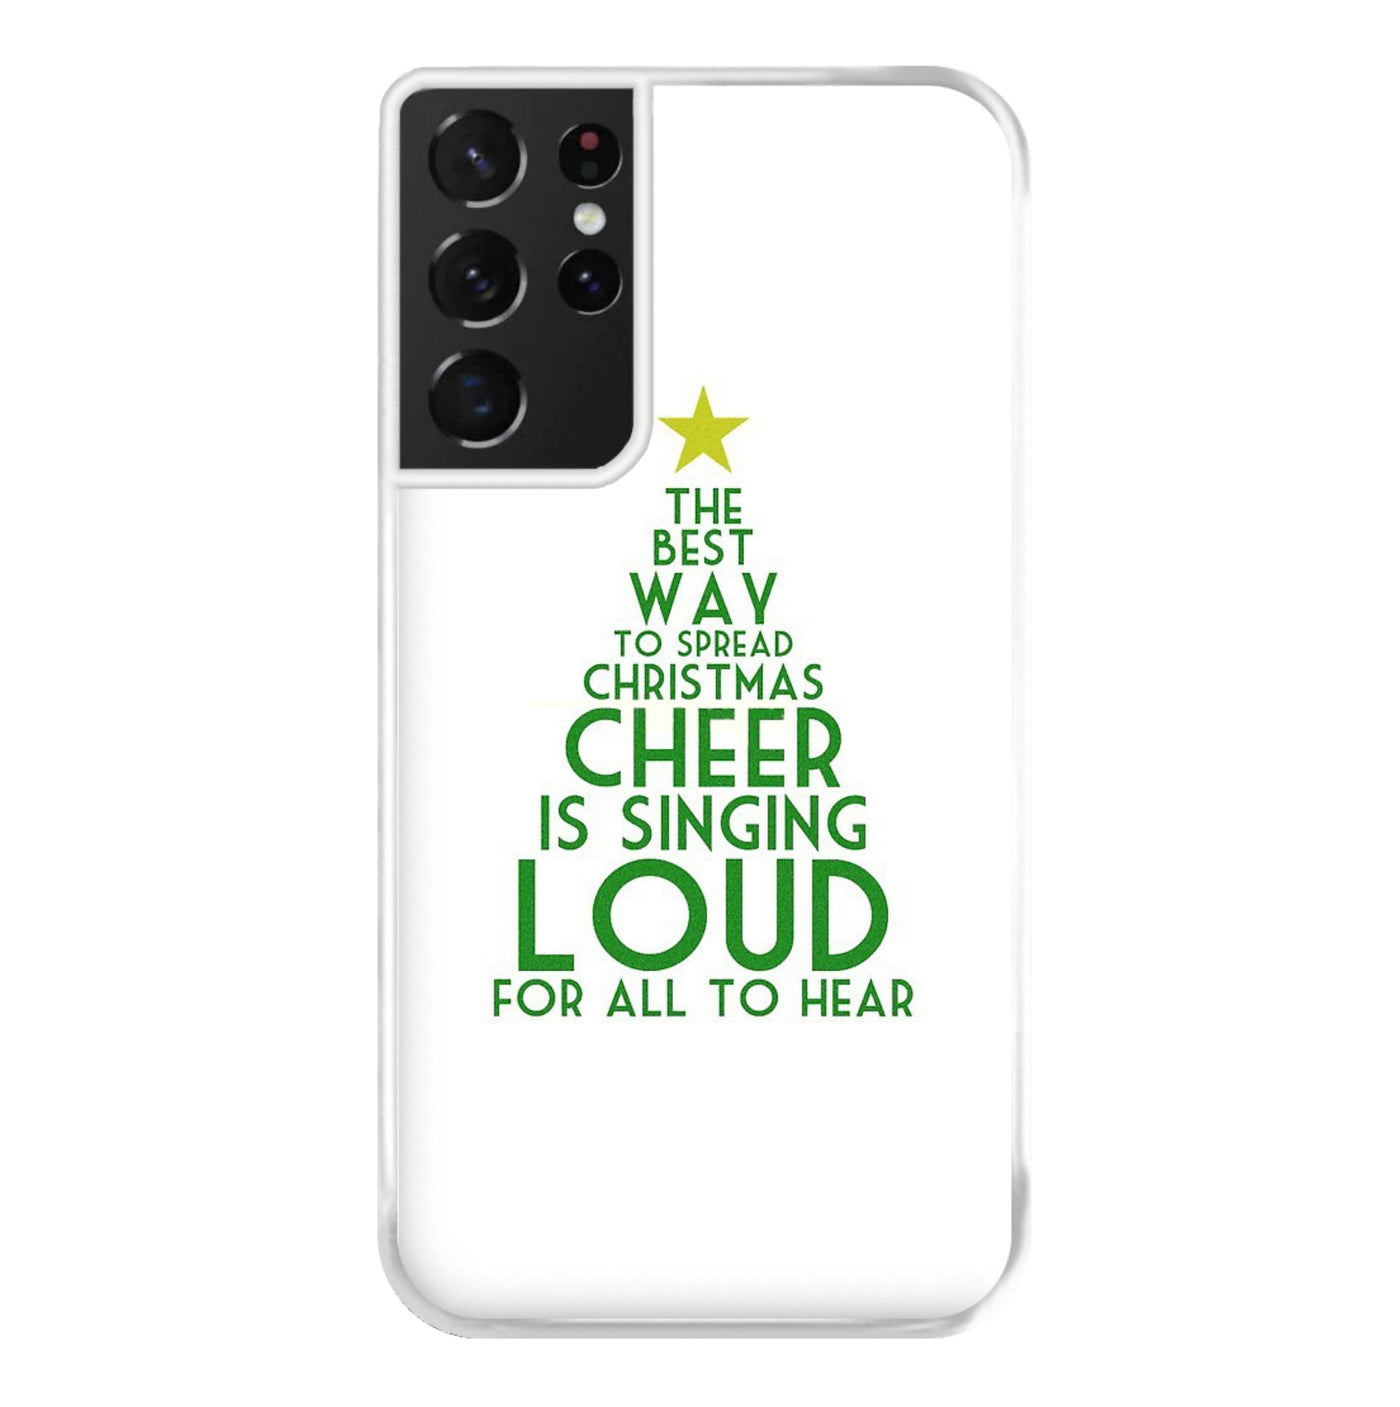 The Best Way To Spread Christmas Cheer - Elf Phone Case